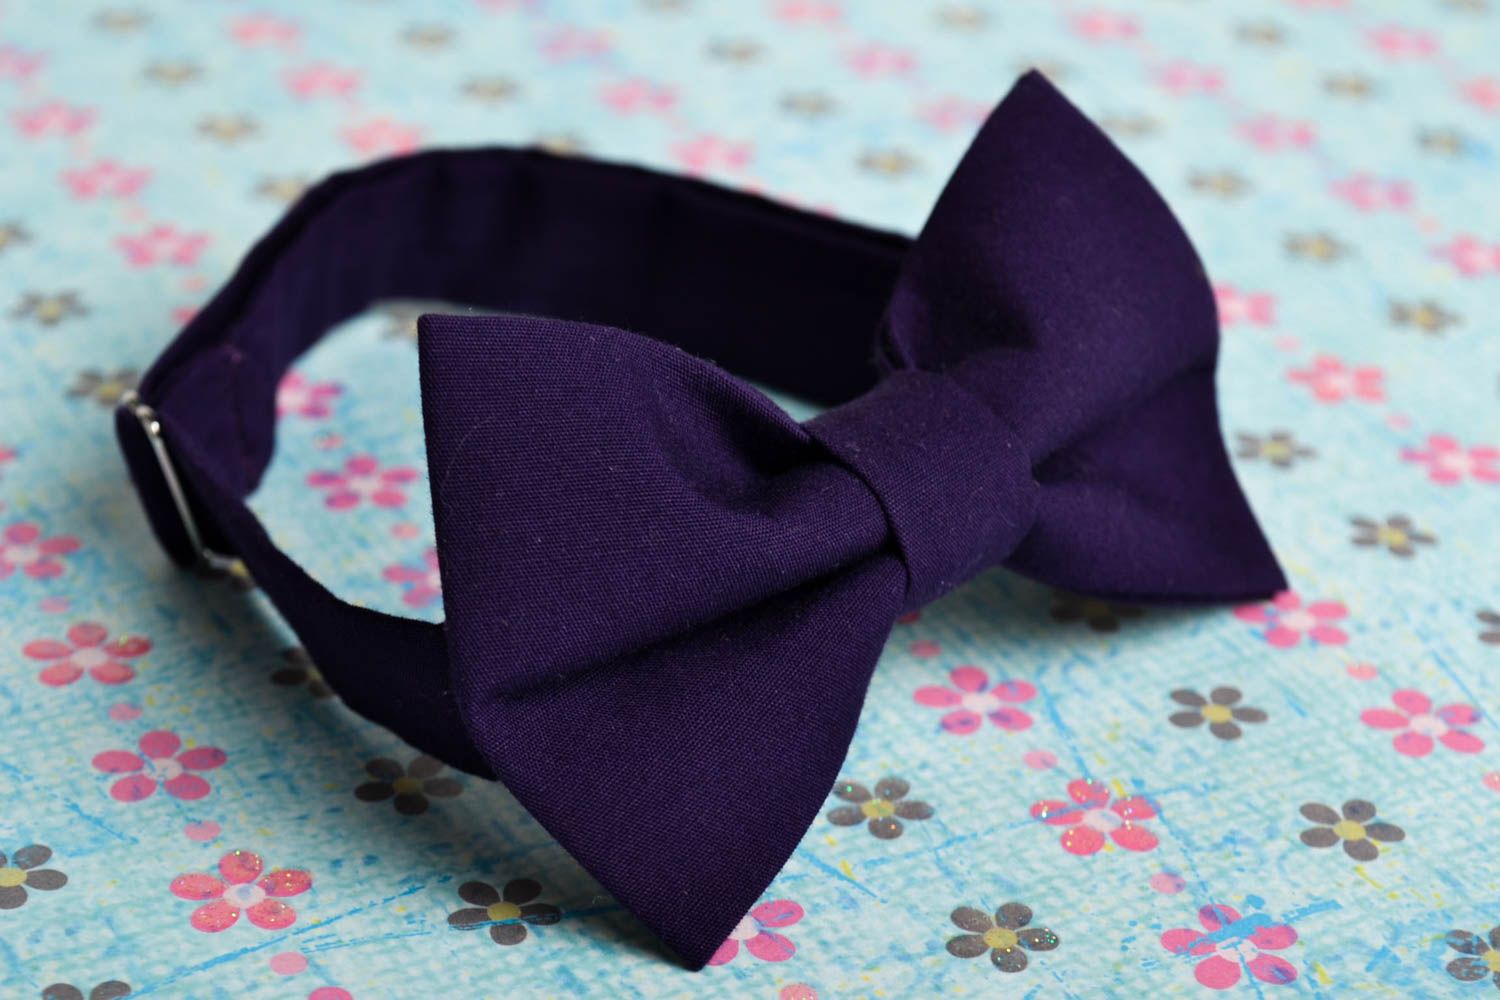 Handmade bow tie cool bow tie designer accessories for men gifts for boyfriend photo 1